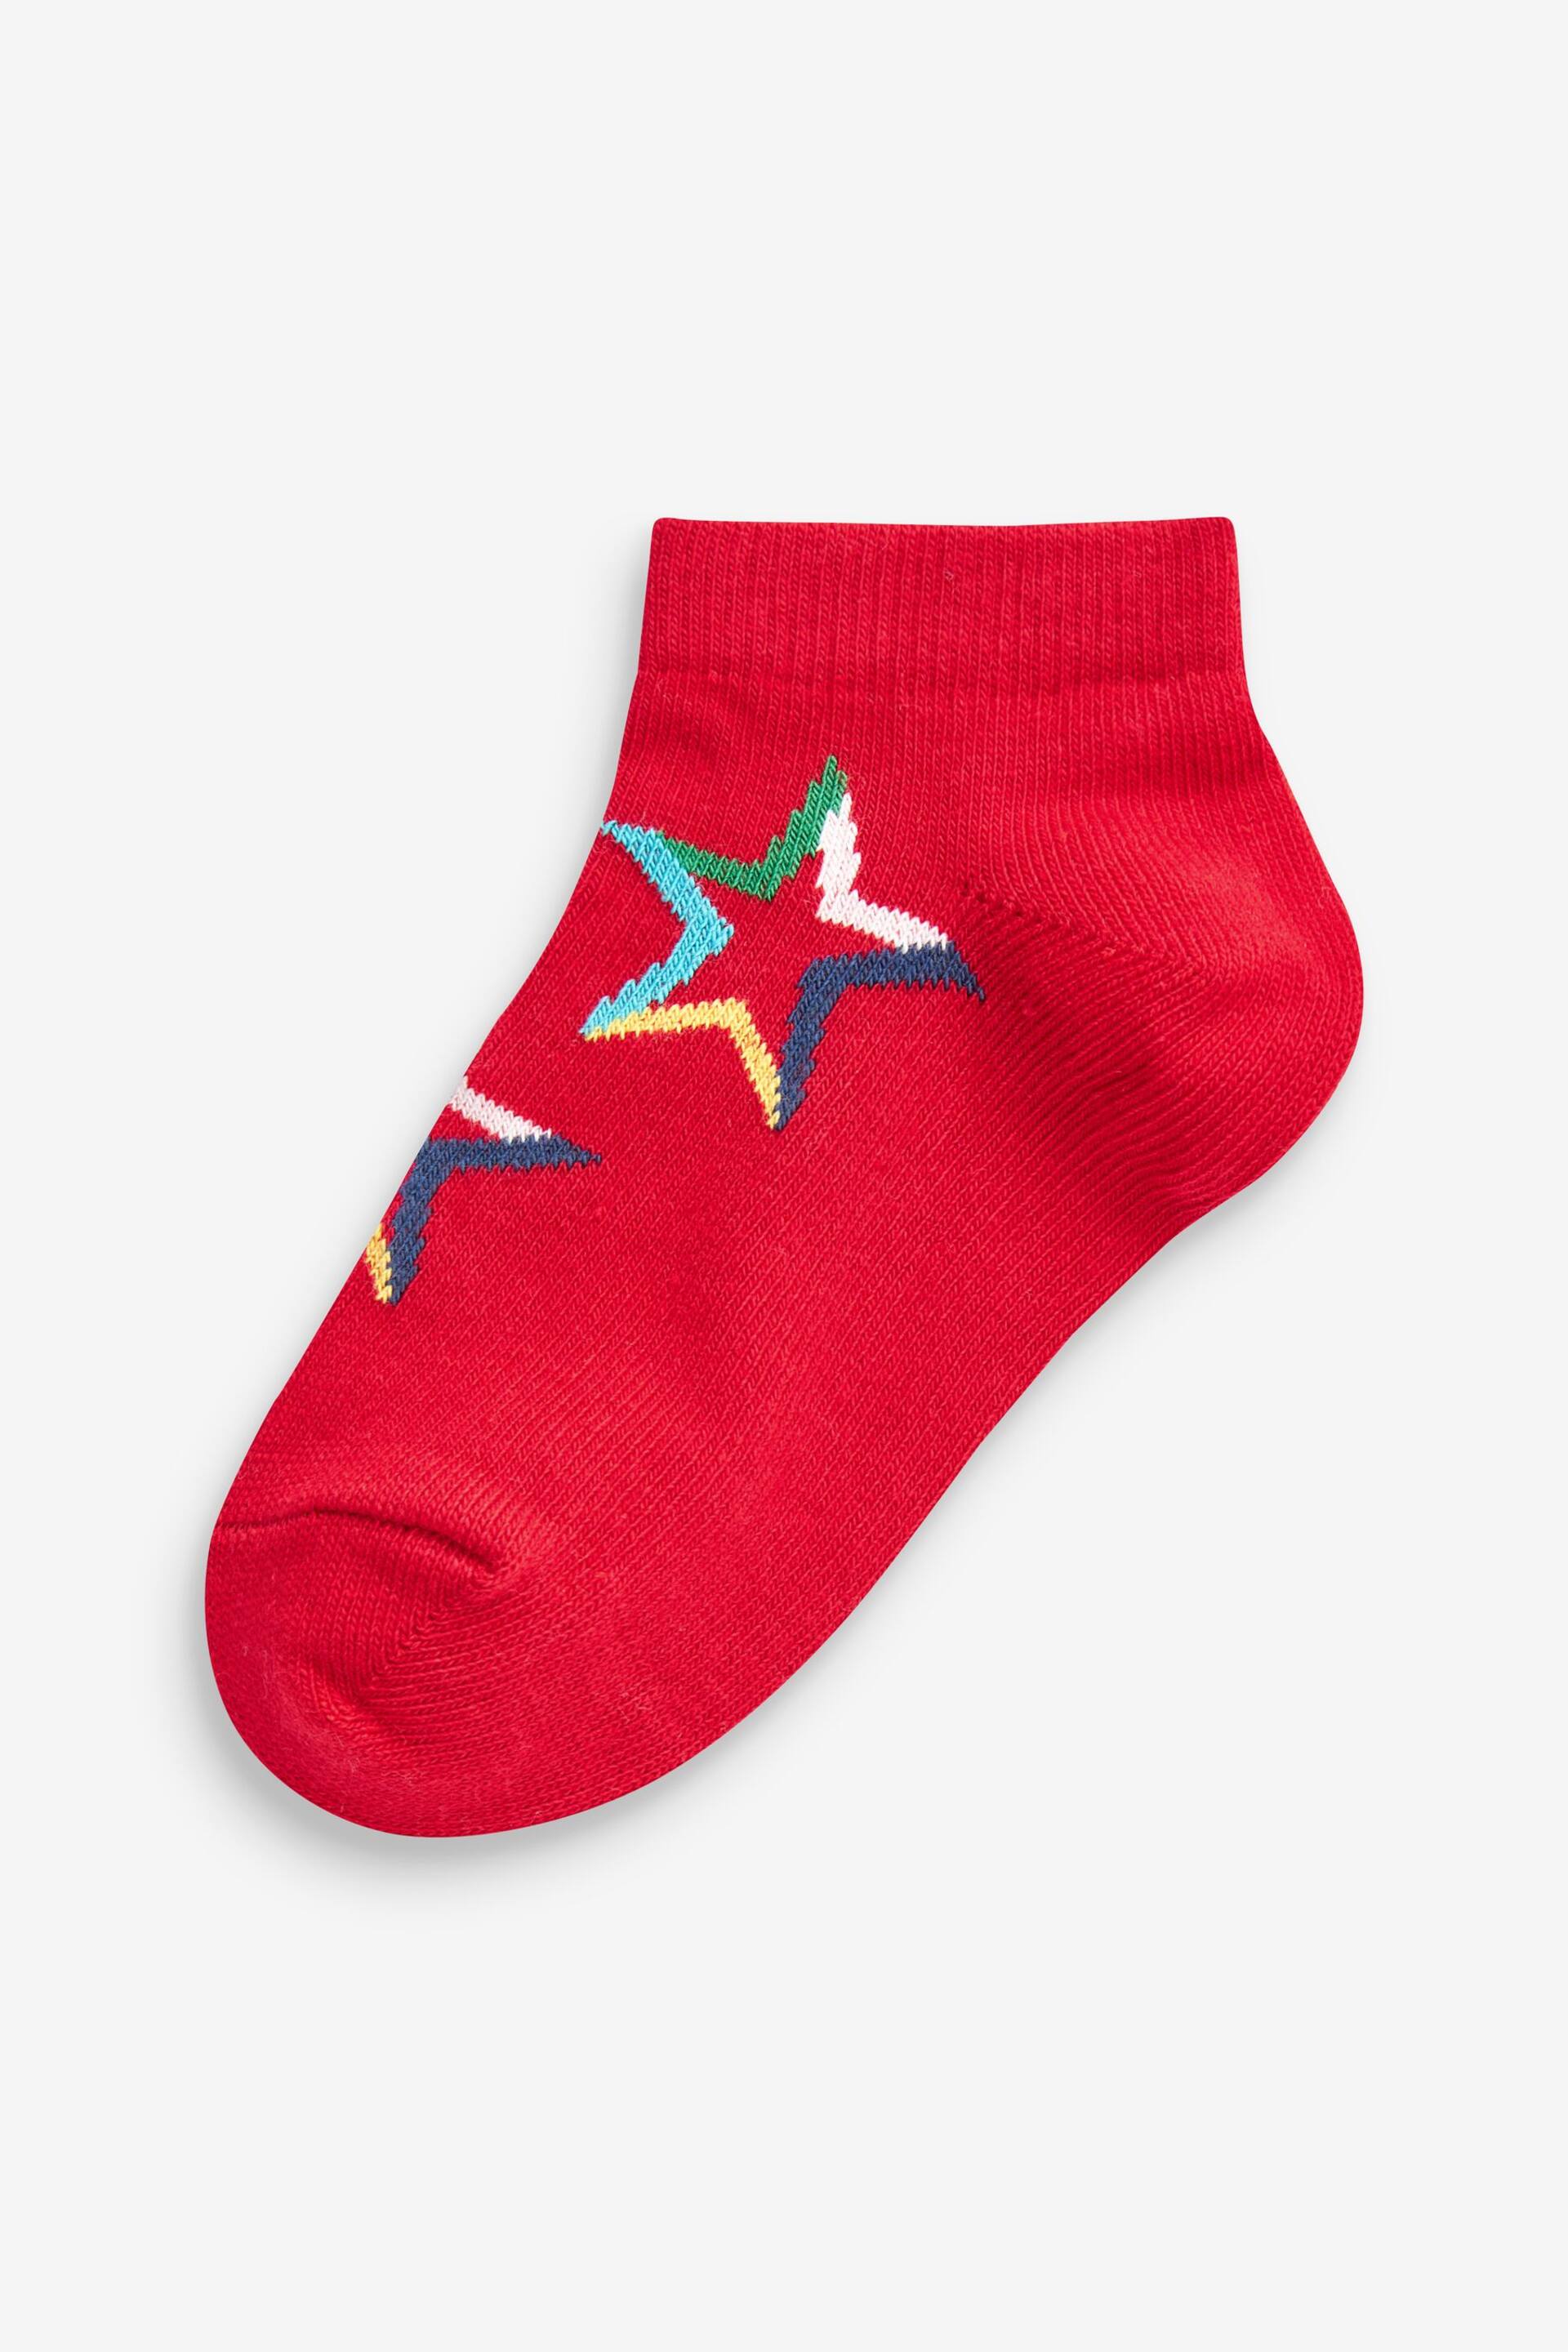 White/Blue/Red Star Cotton Rich Trainer Socks 7 Pack - Image 7 of 8